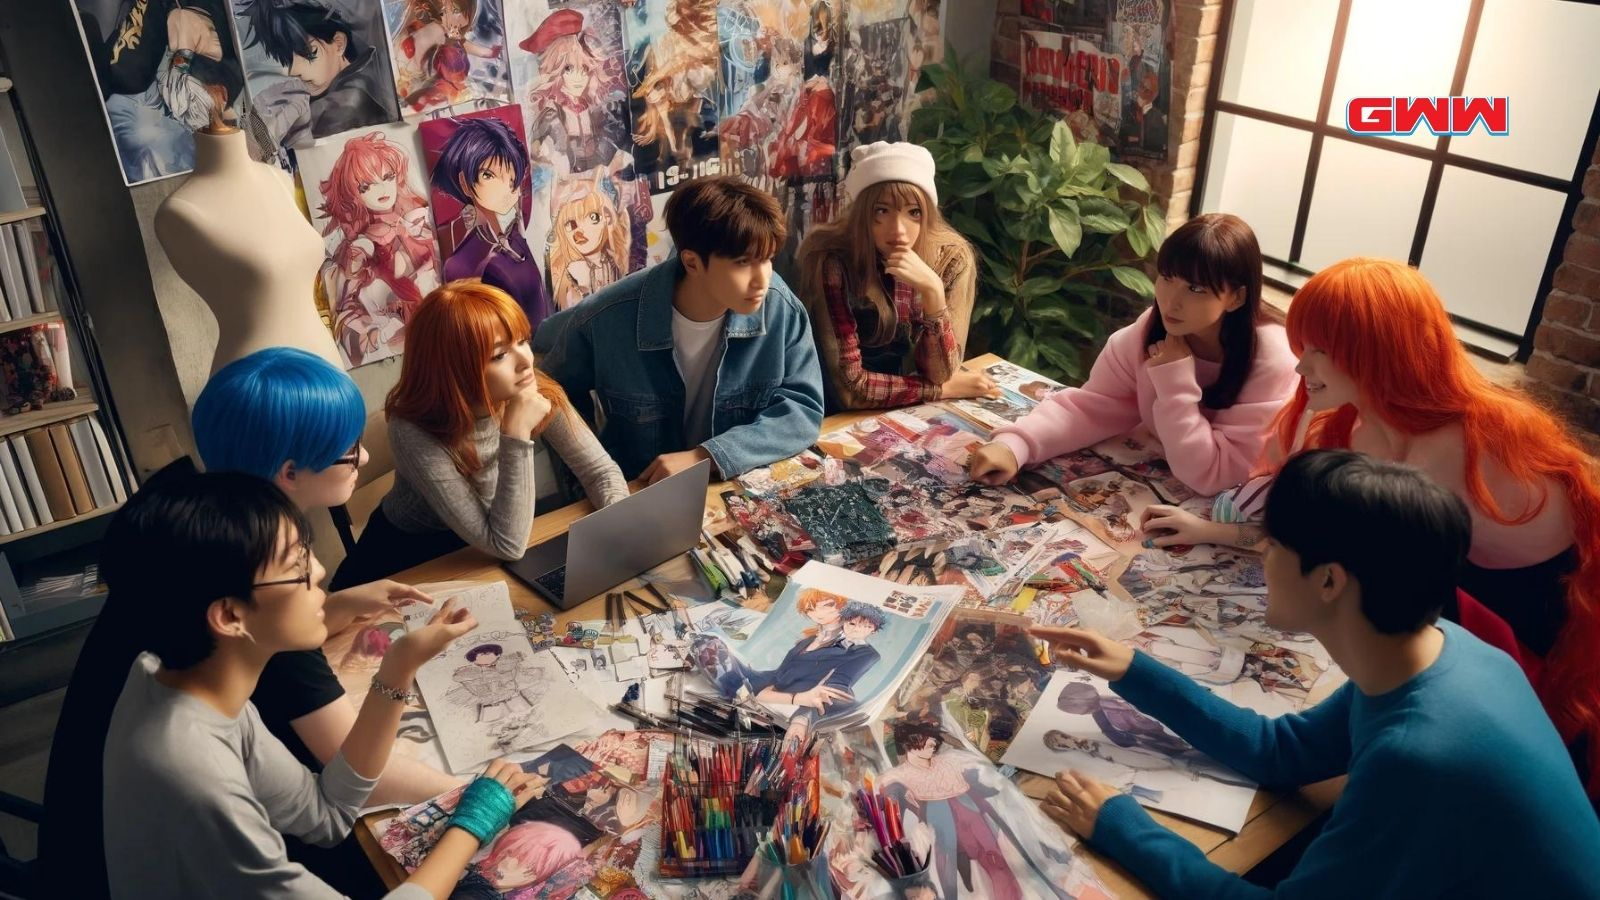 Group planning anime cosplays with magazines and fabric samples